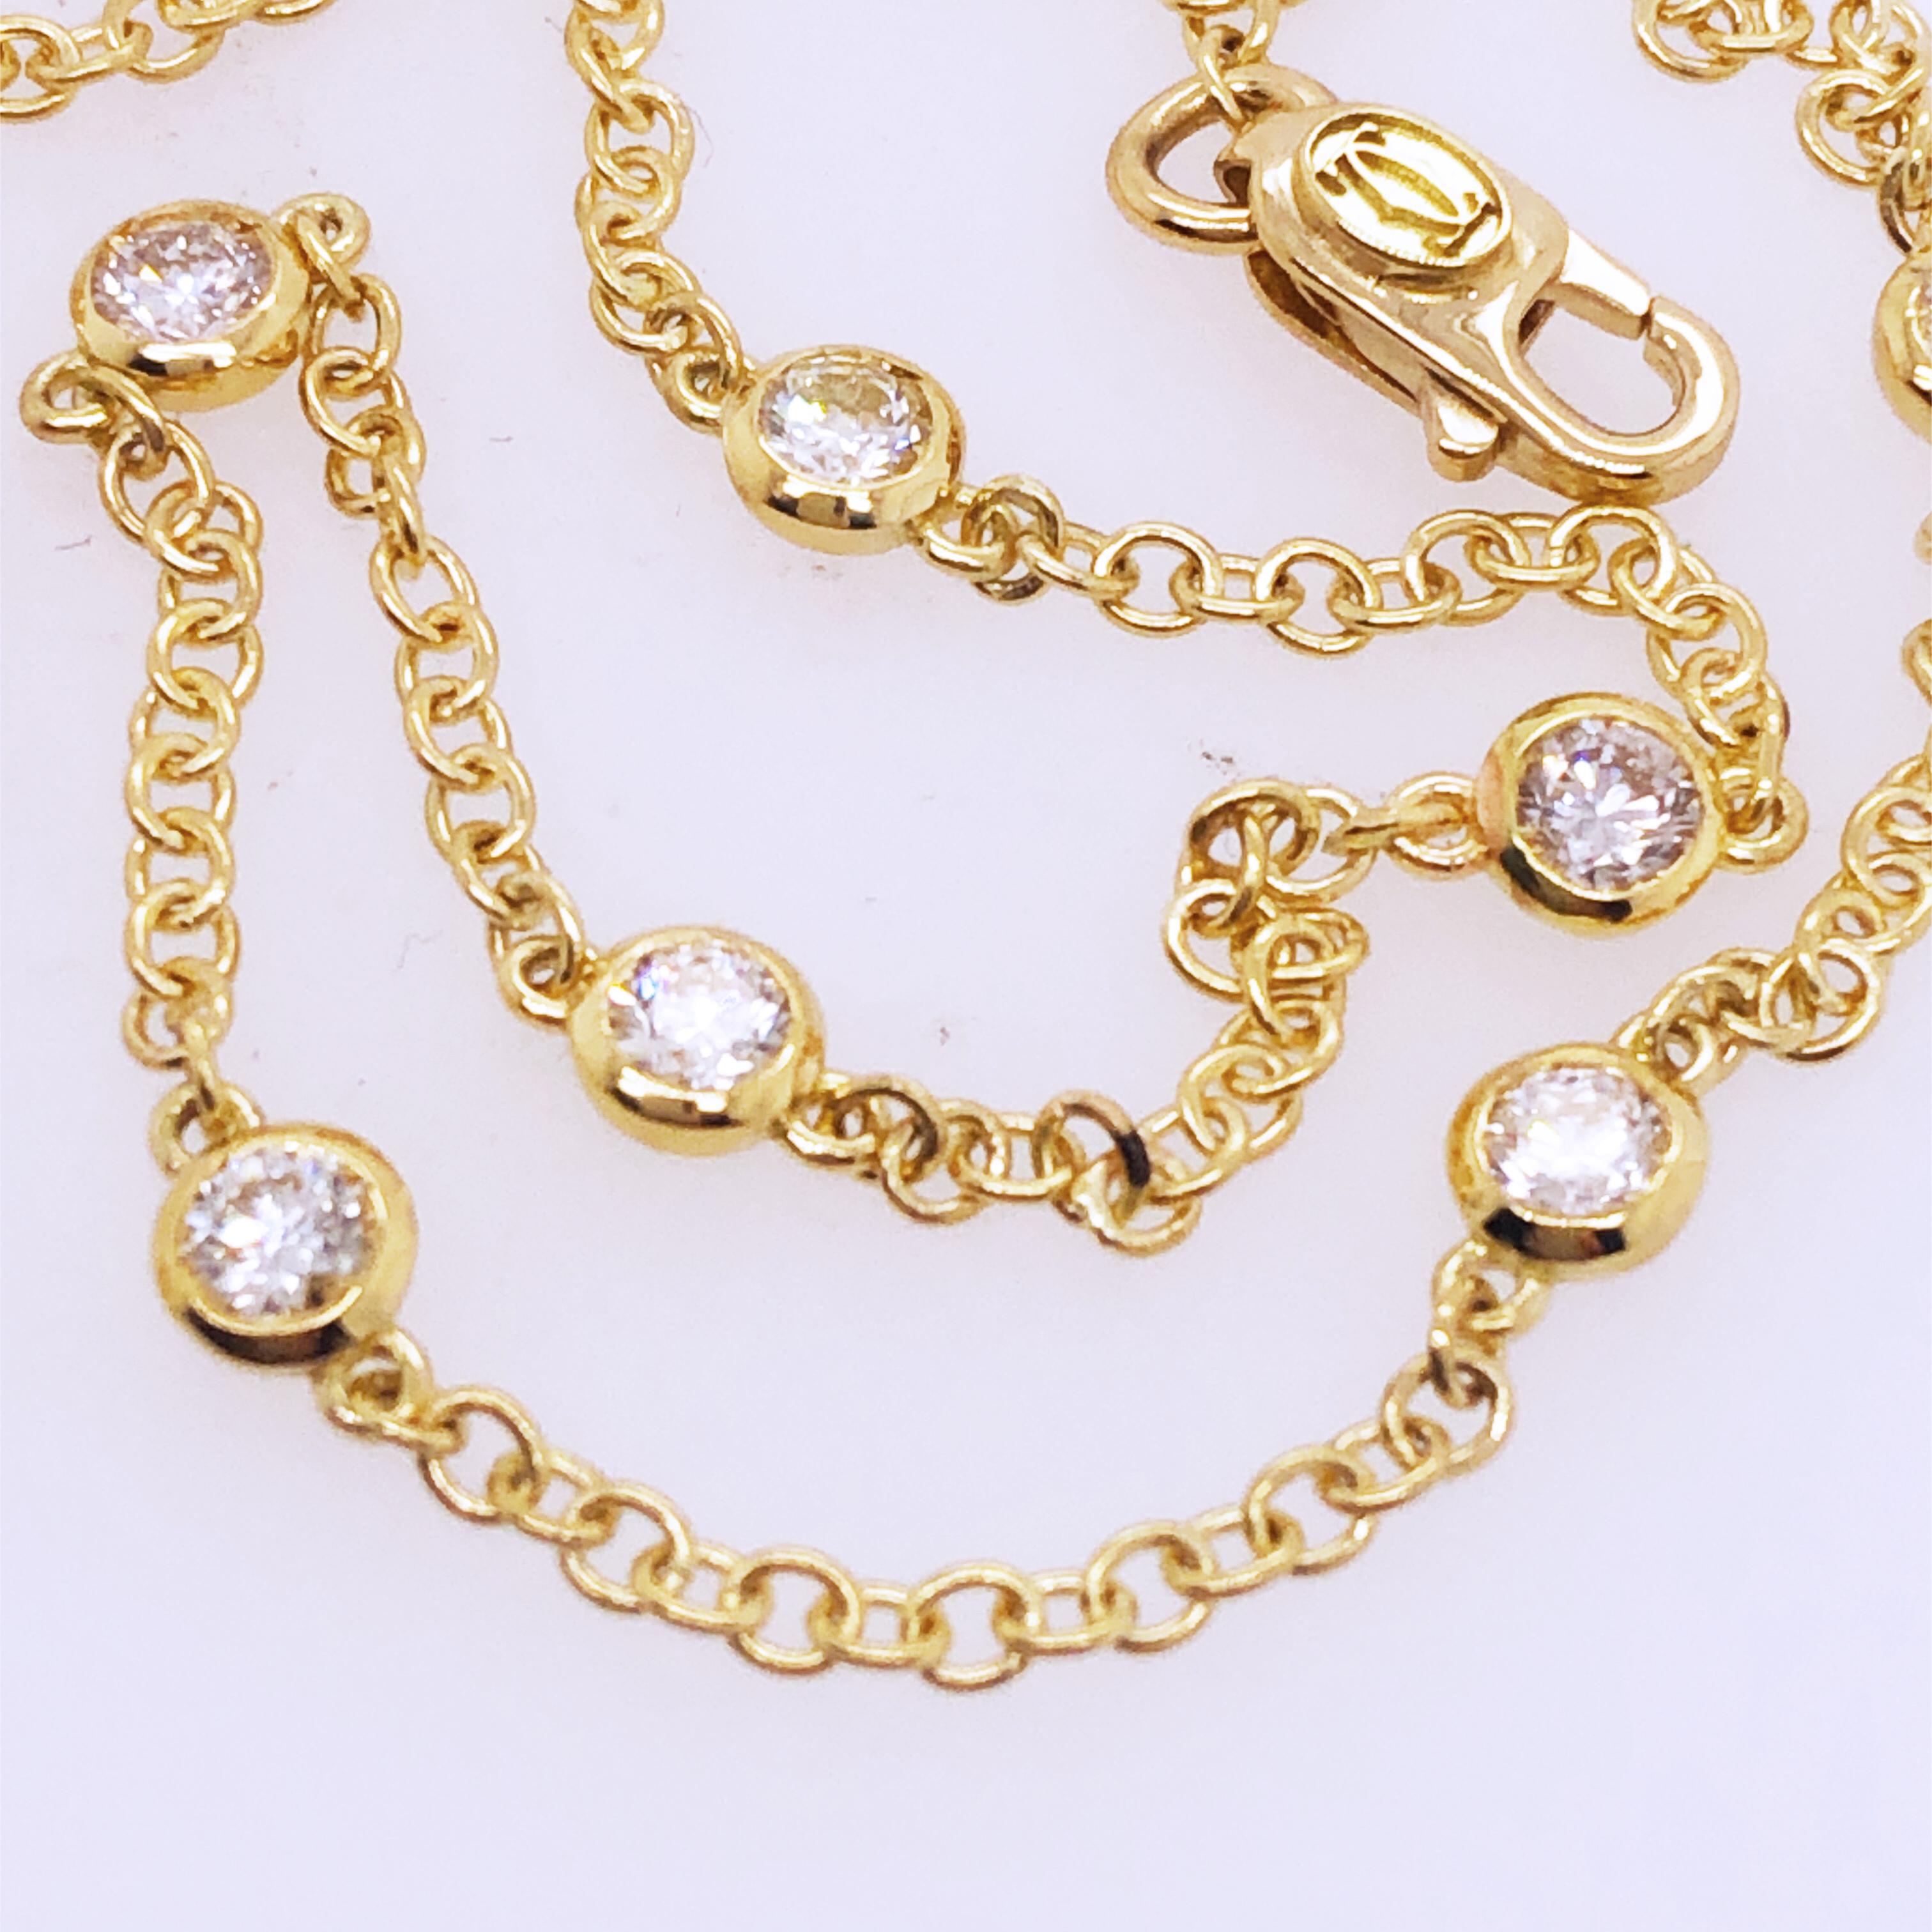 Original 1985, Extremely Rare Cartier Diamonds by the Yard 18Kt Yellow Gold 17.32 inches(44cm) Necklace: Cartier develops the idea of deploying exceptional diamonds into a minimalist design.
A simple, all time wearable yellow chain is interlinked